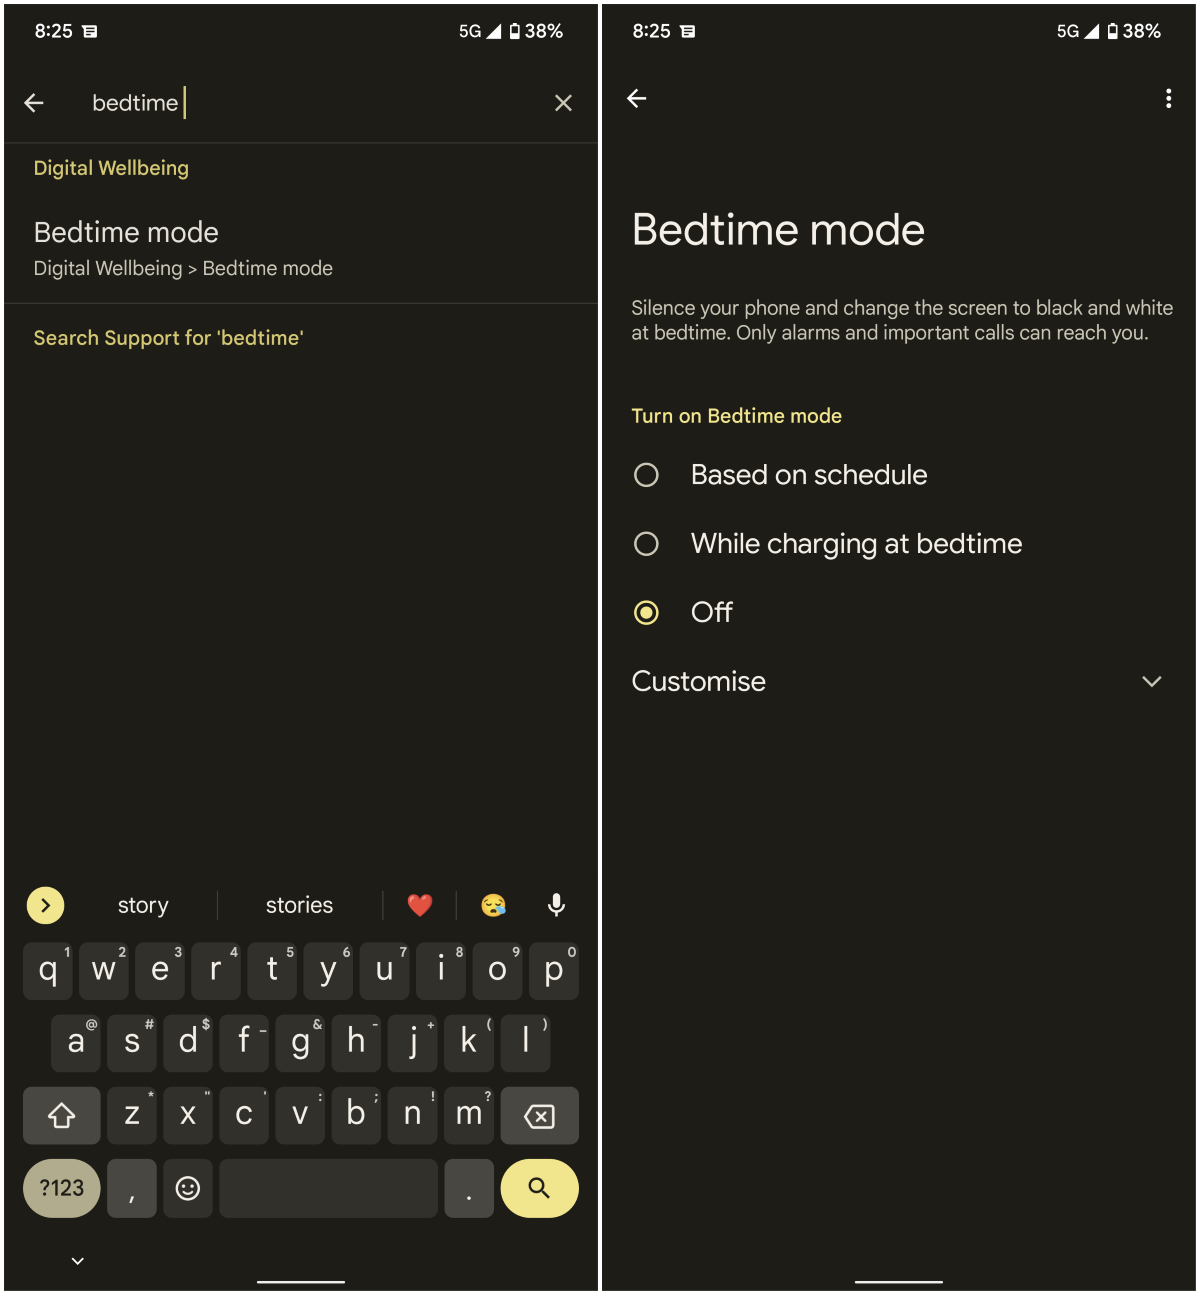 Configure Bedtime mode in Android